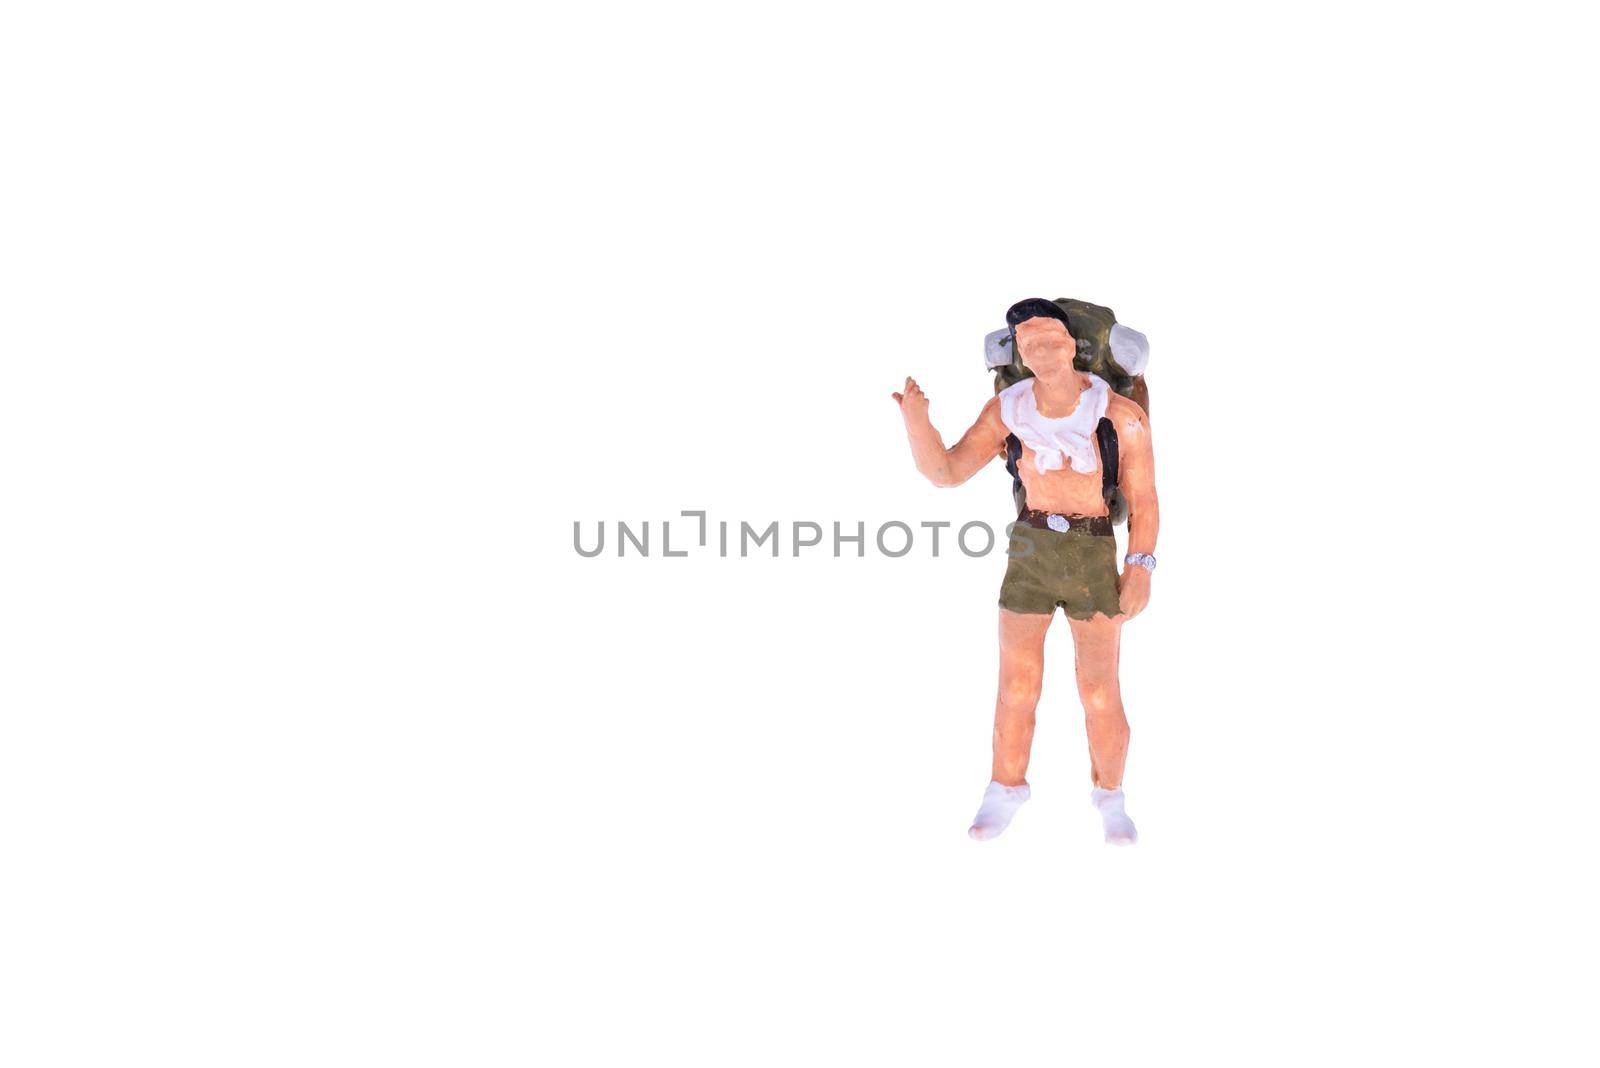 Close up of Miniature backpacker and tourist people isolate on white background. Elegant Design with copy space for placement your text, mock up for travel concept